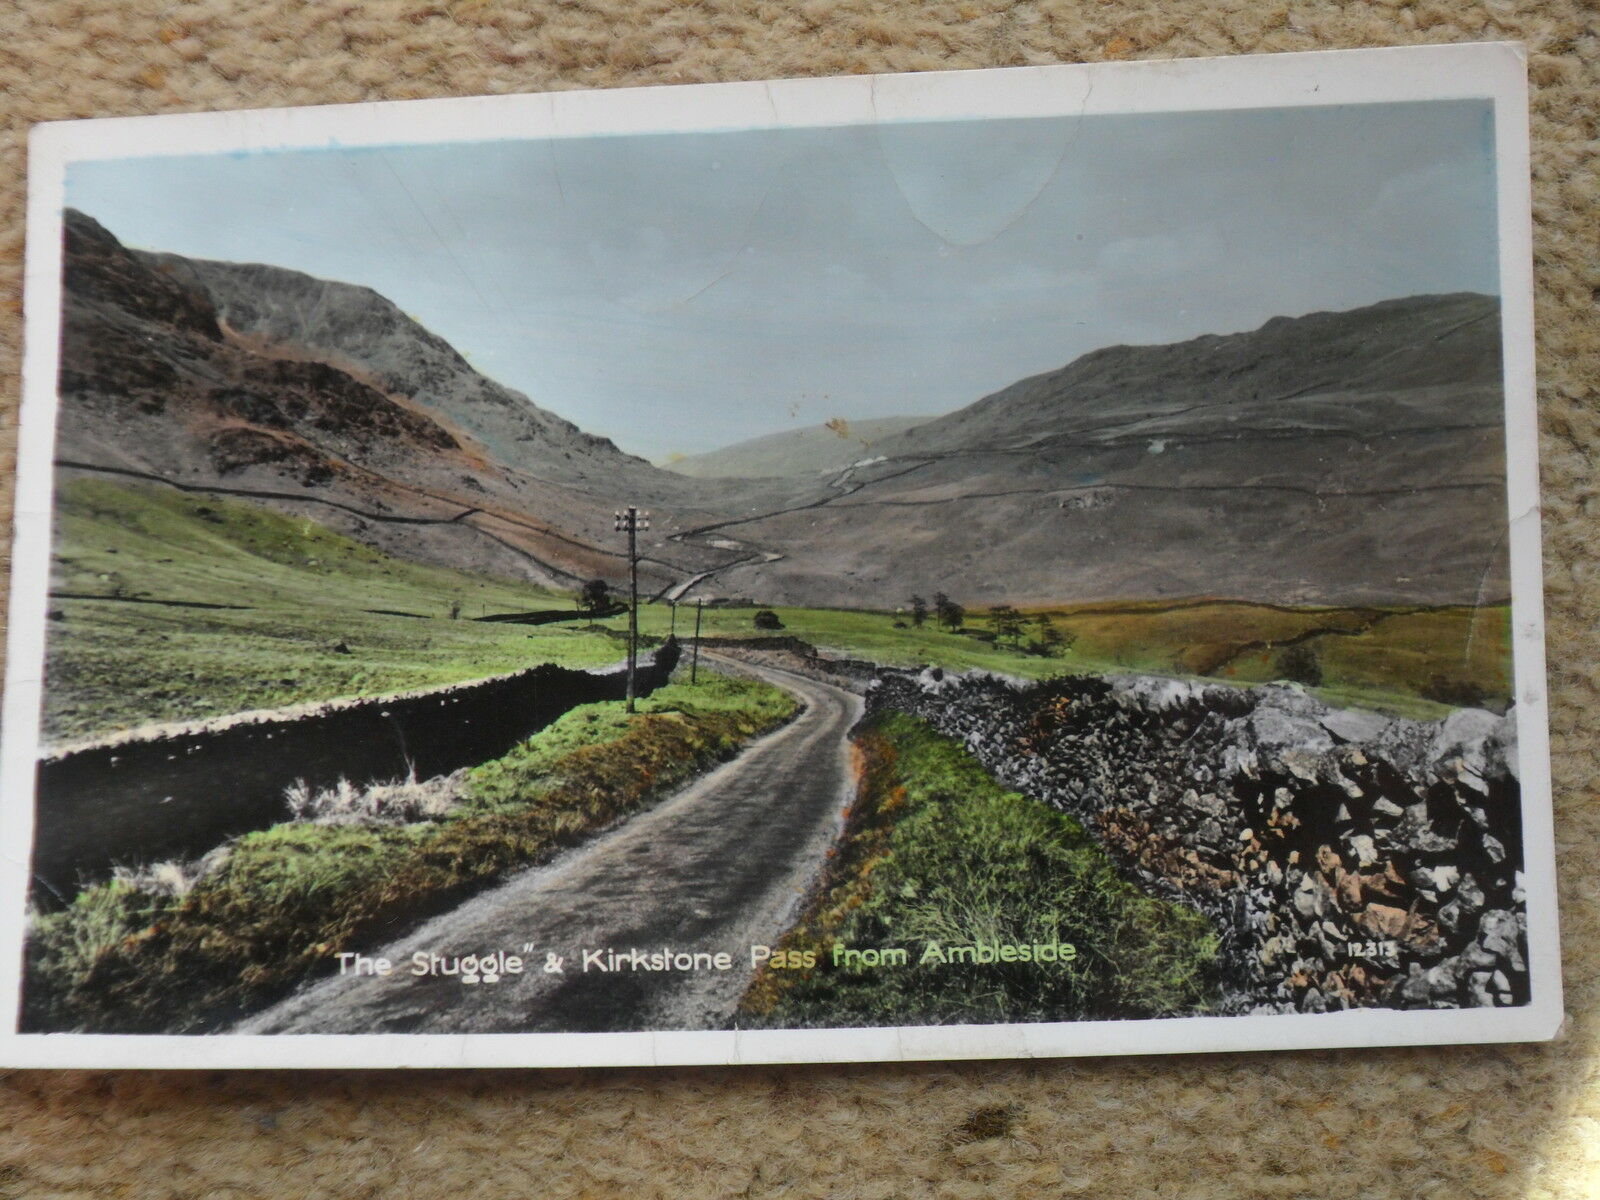 House Clearance - REAL PHOTO.POSTCARD "THE STUGGLE" AND KIRKSTONE PASS FROM AMBLESIDE.NOT POSTED.